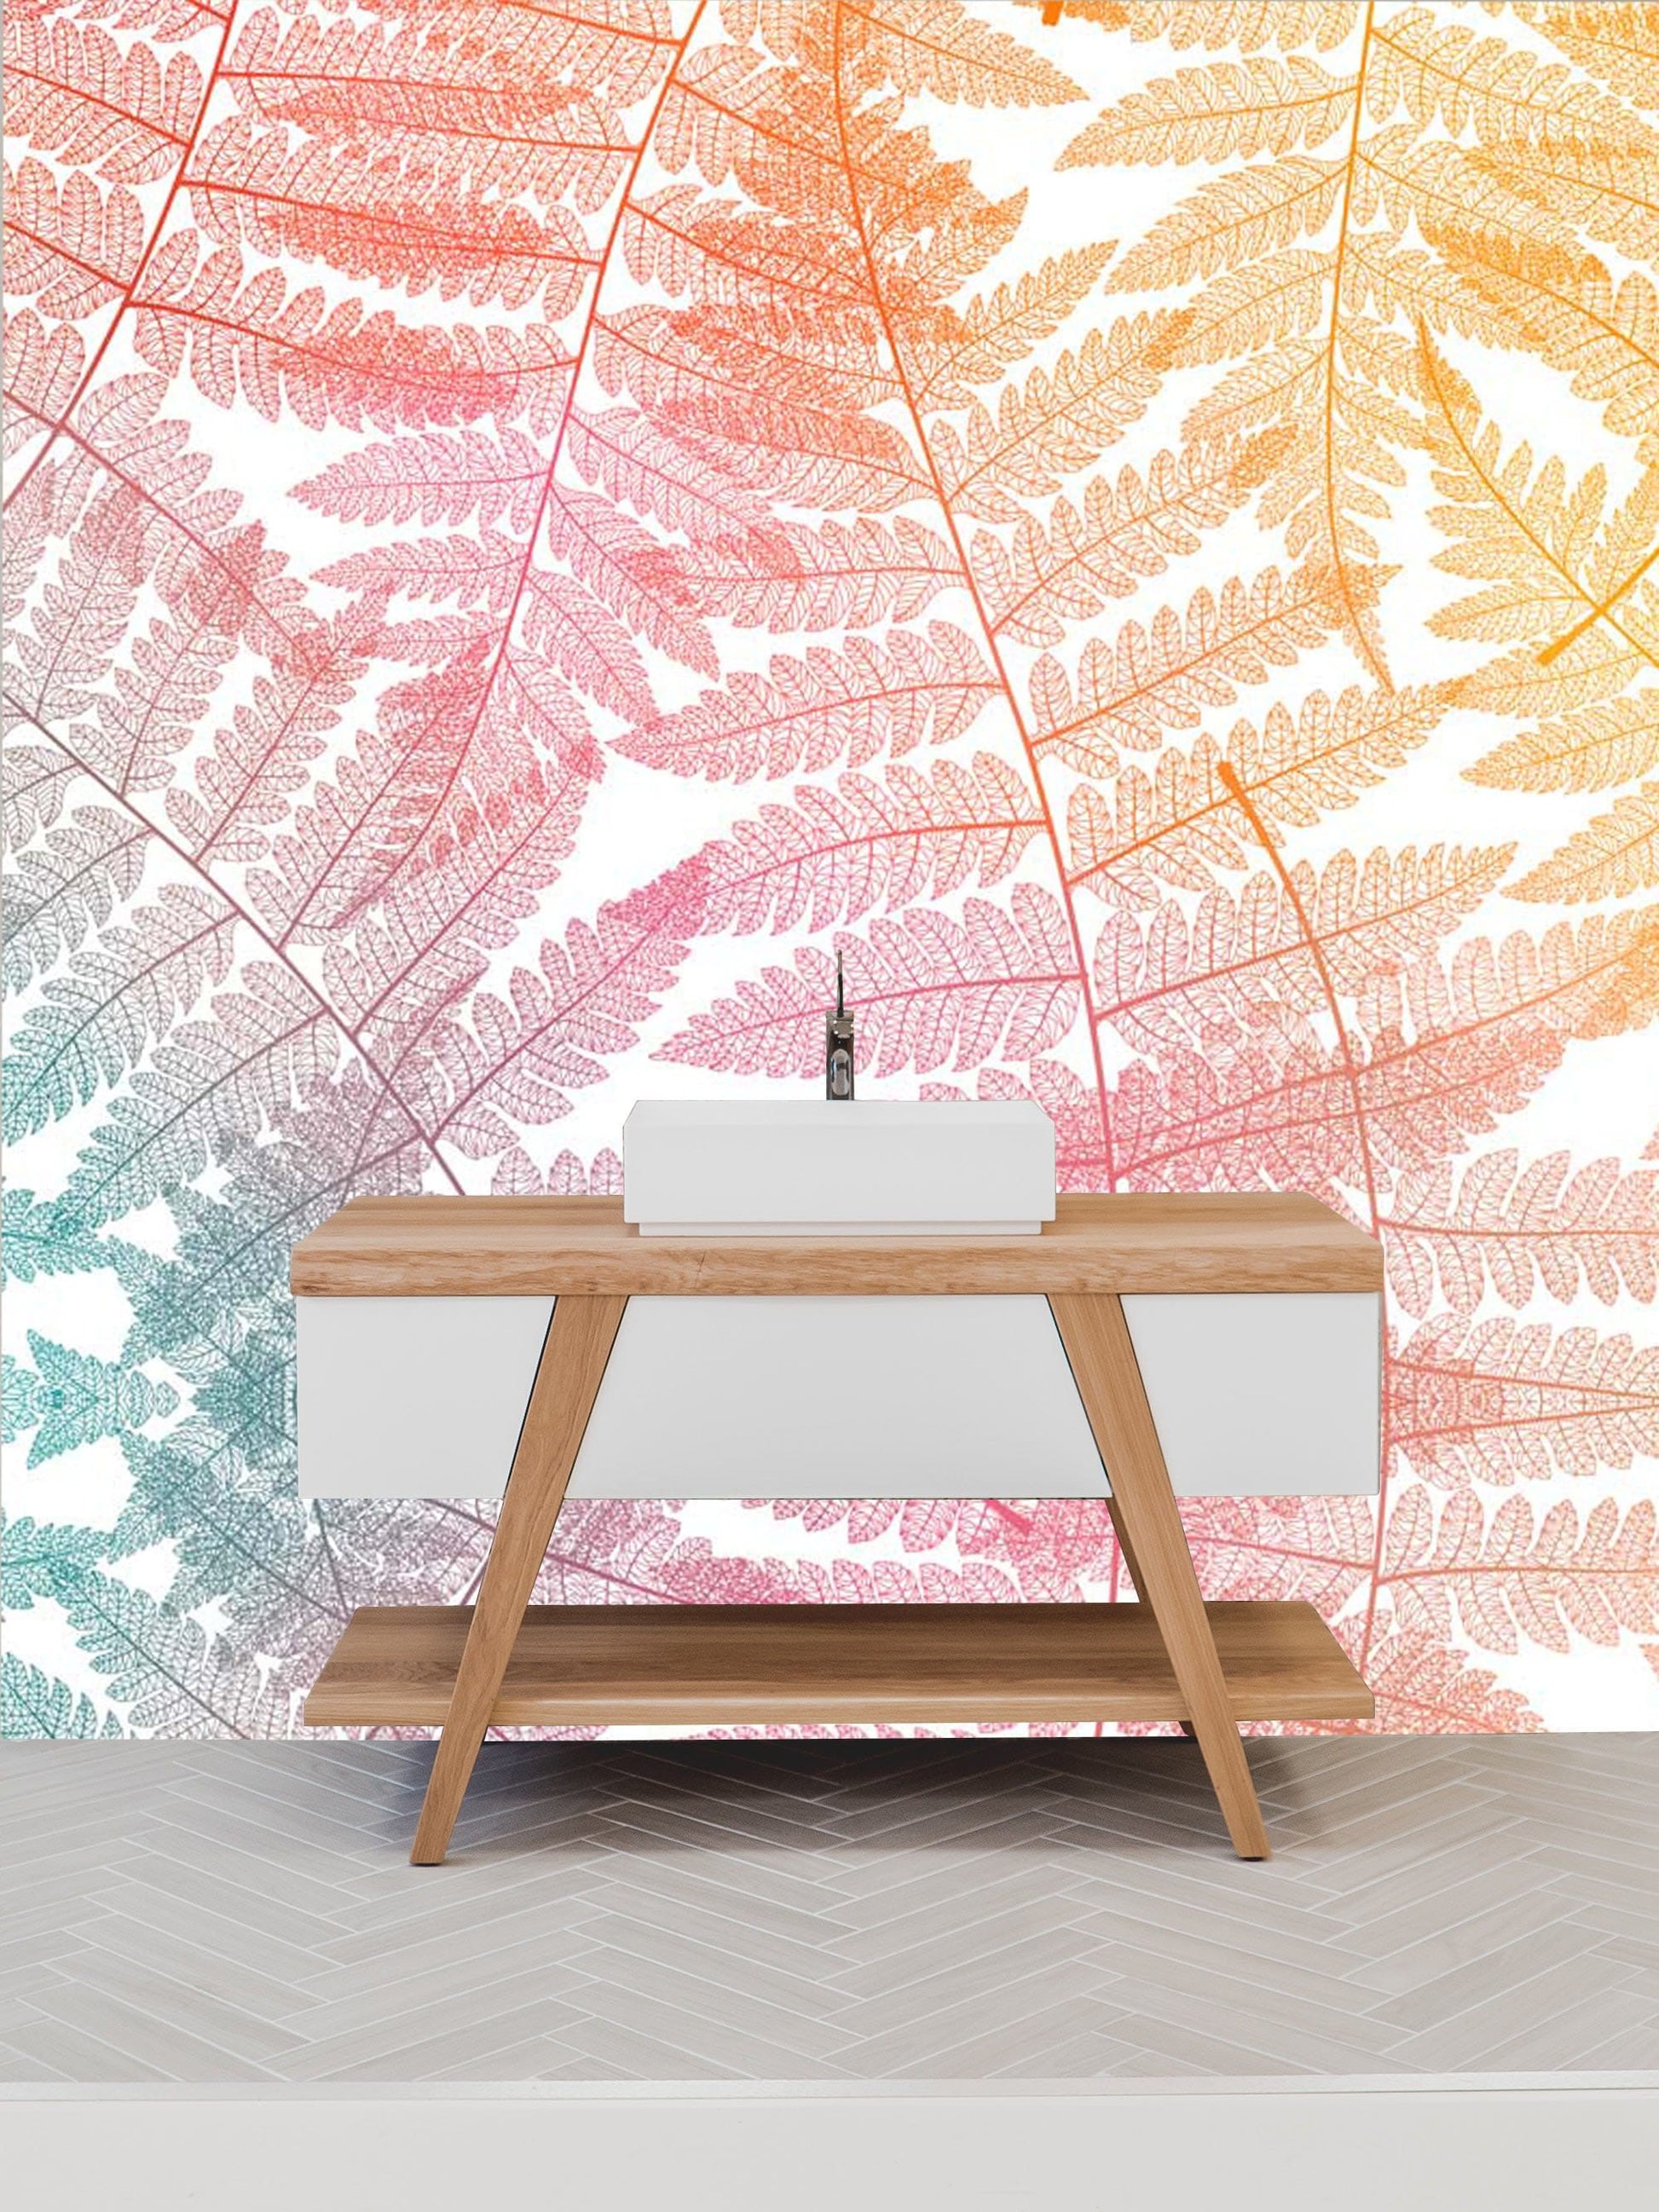 Living room wallpaper mural with spliced-together colourful leaves